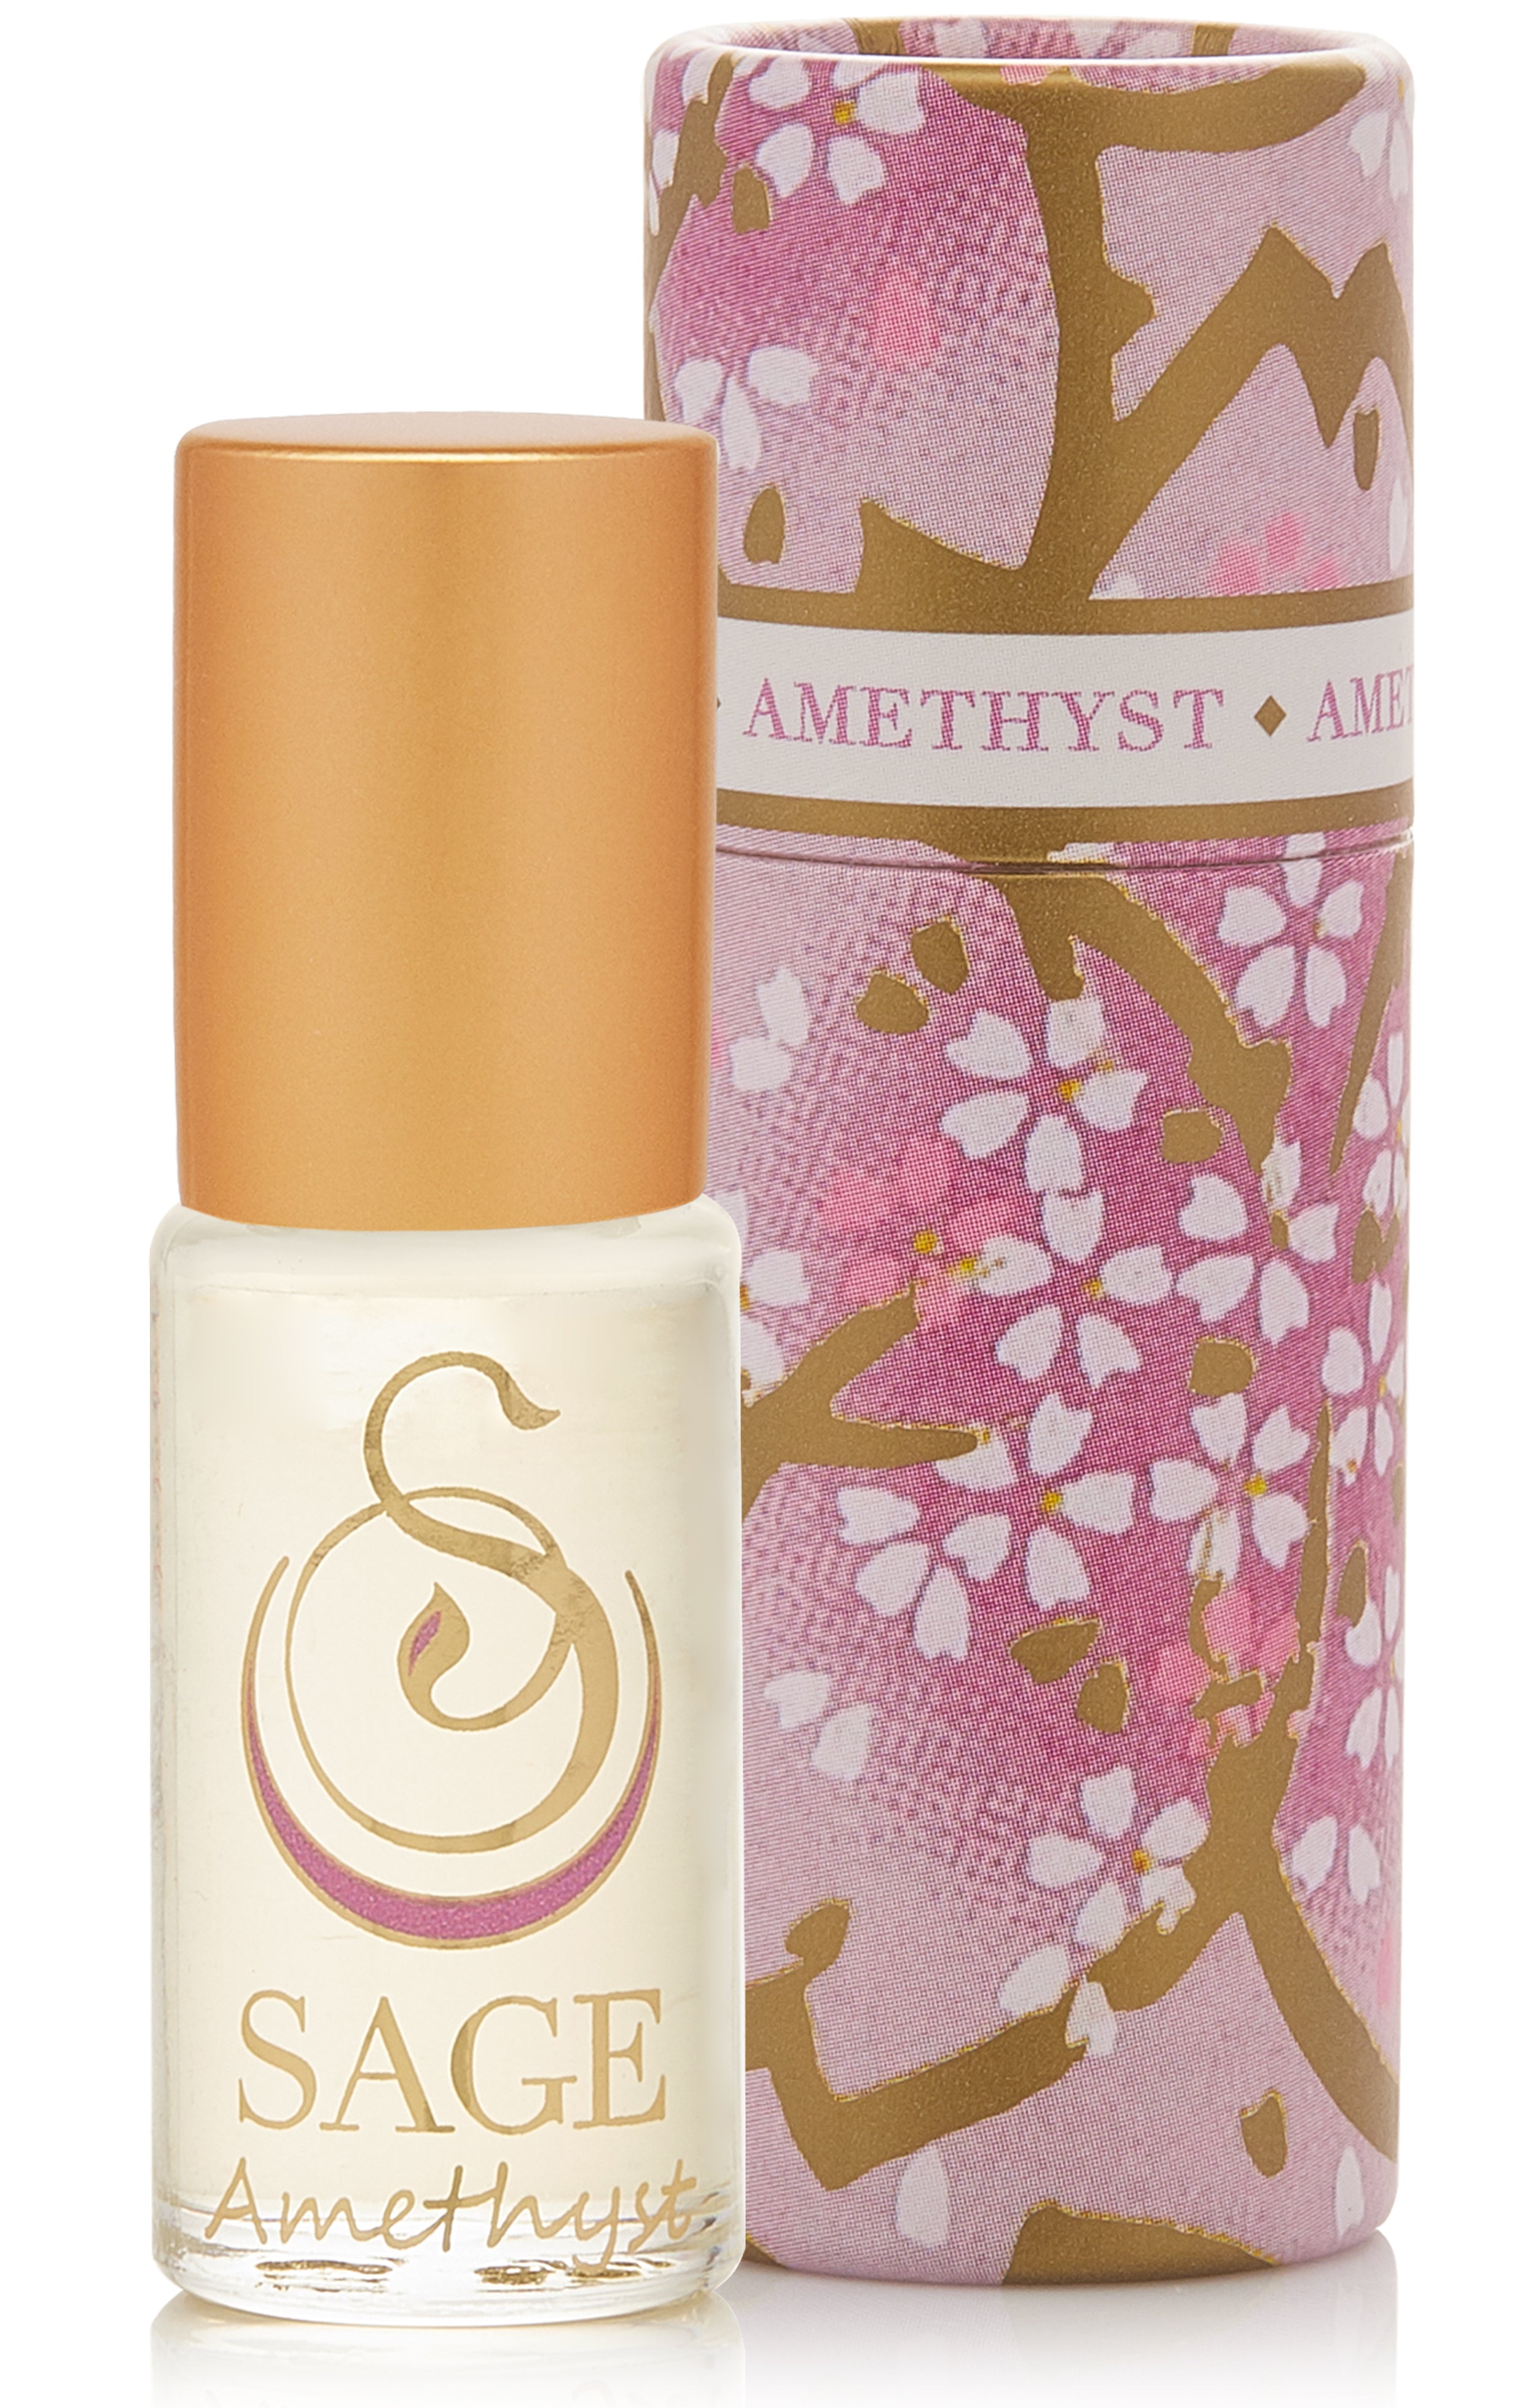 Amethyst 1/8 oz Perfume Oil Concentrate Roll-On by Sage